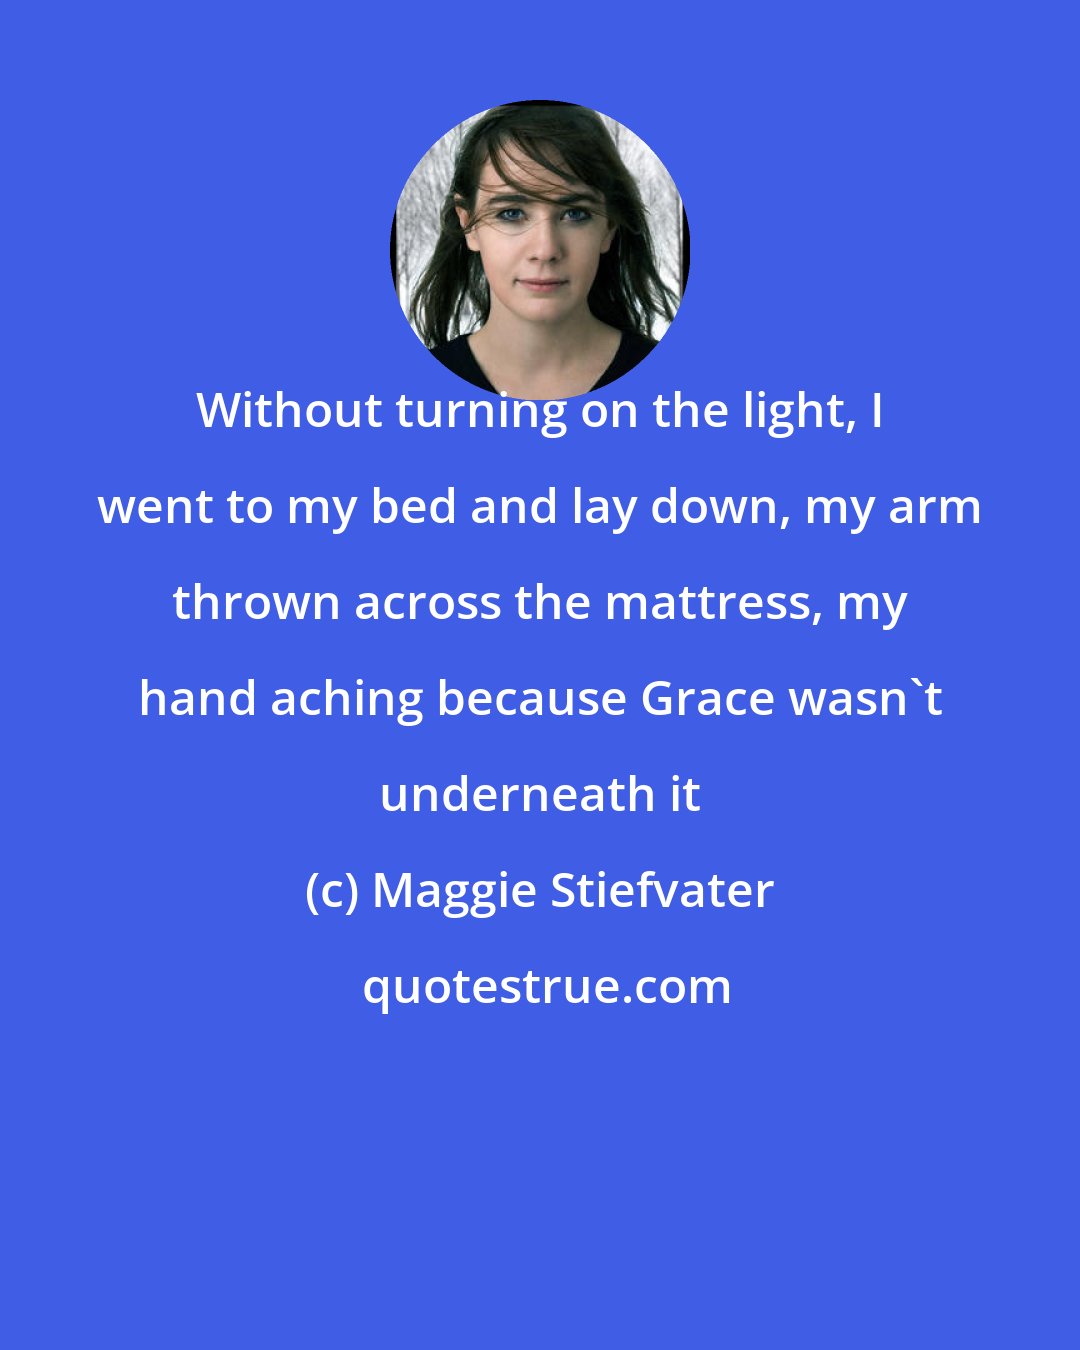 Maggie Stiefvater: Without turning on the light, I went to my bed and lay down, my arm thrown across the mattress, my hand aching because Grace wasn't underneath it